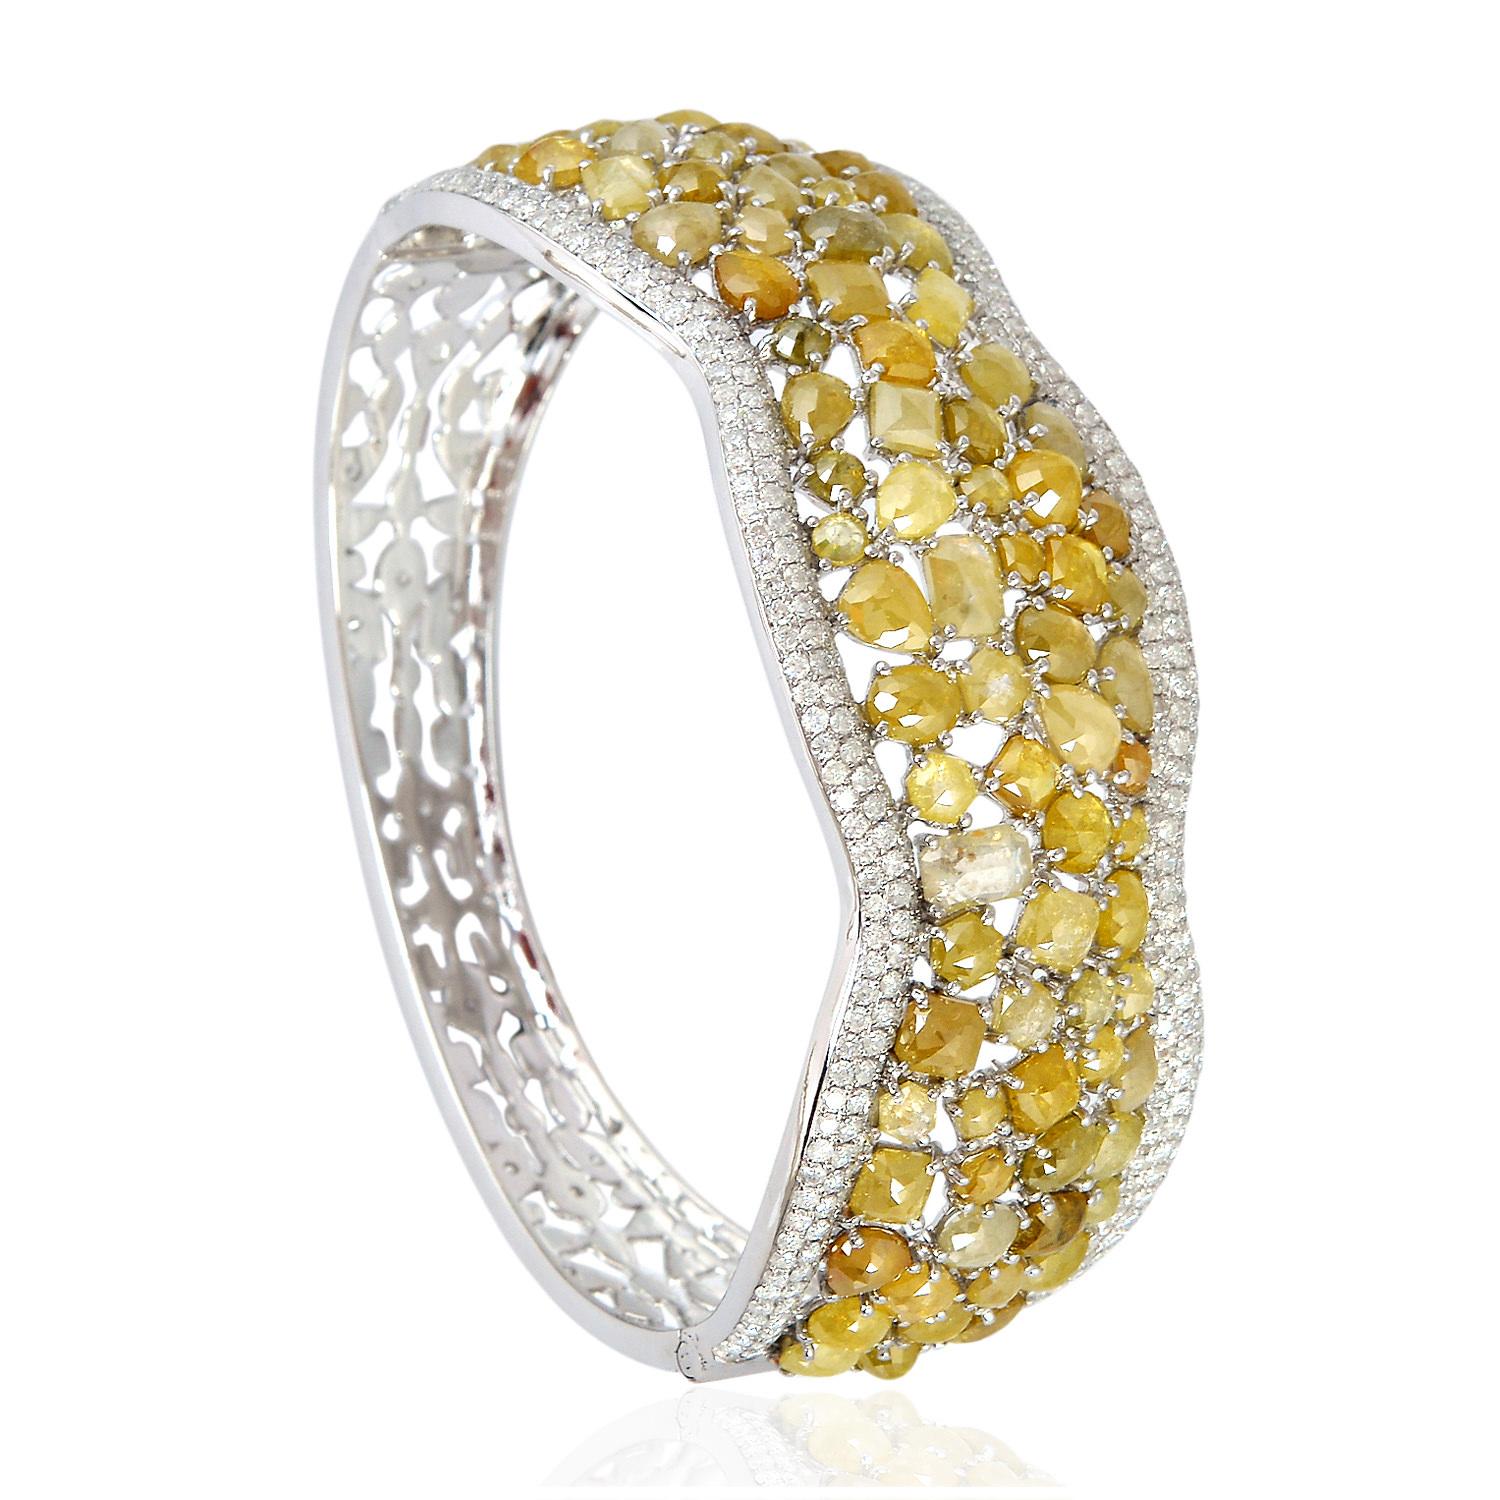 Art Nouveau 24.83ct Yellow Ice Diamond and White Diamond Bangle Set Made in 18K White Gold For Sale